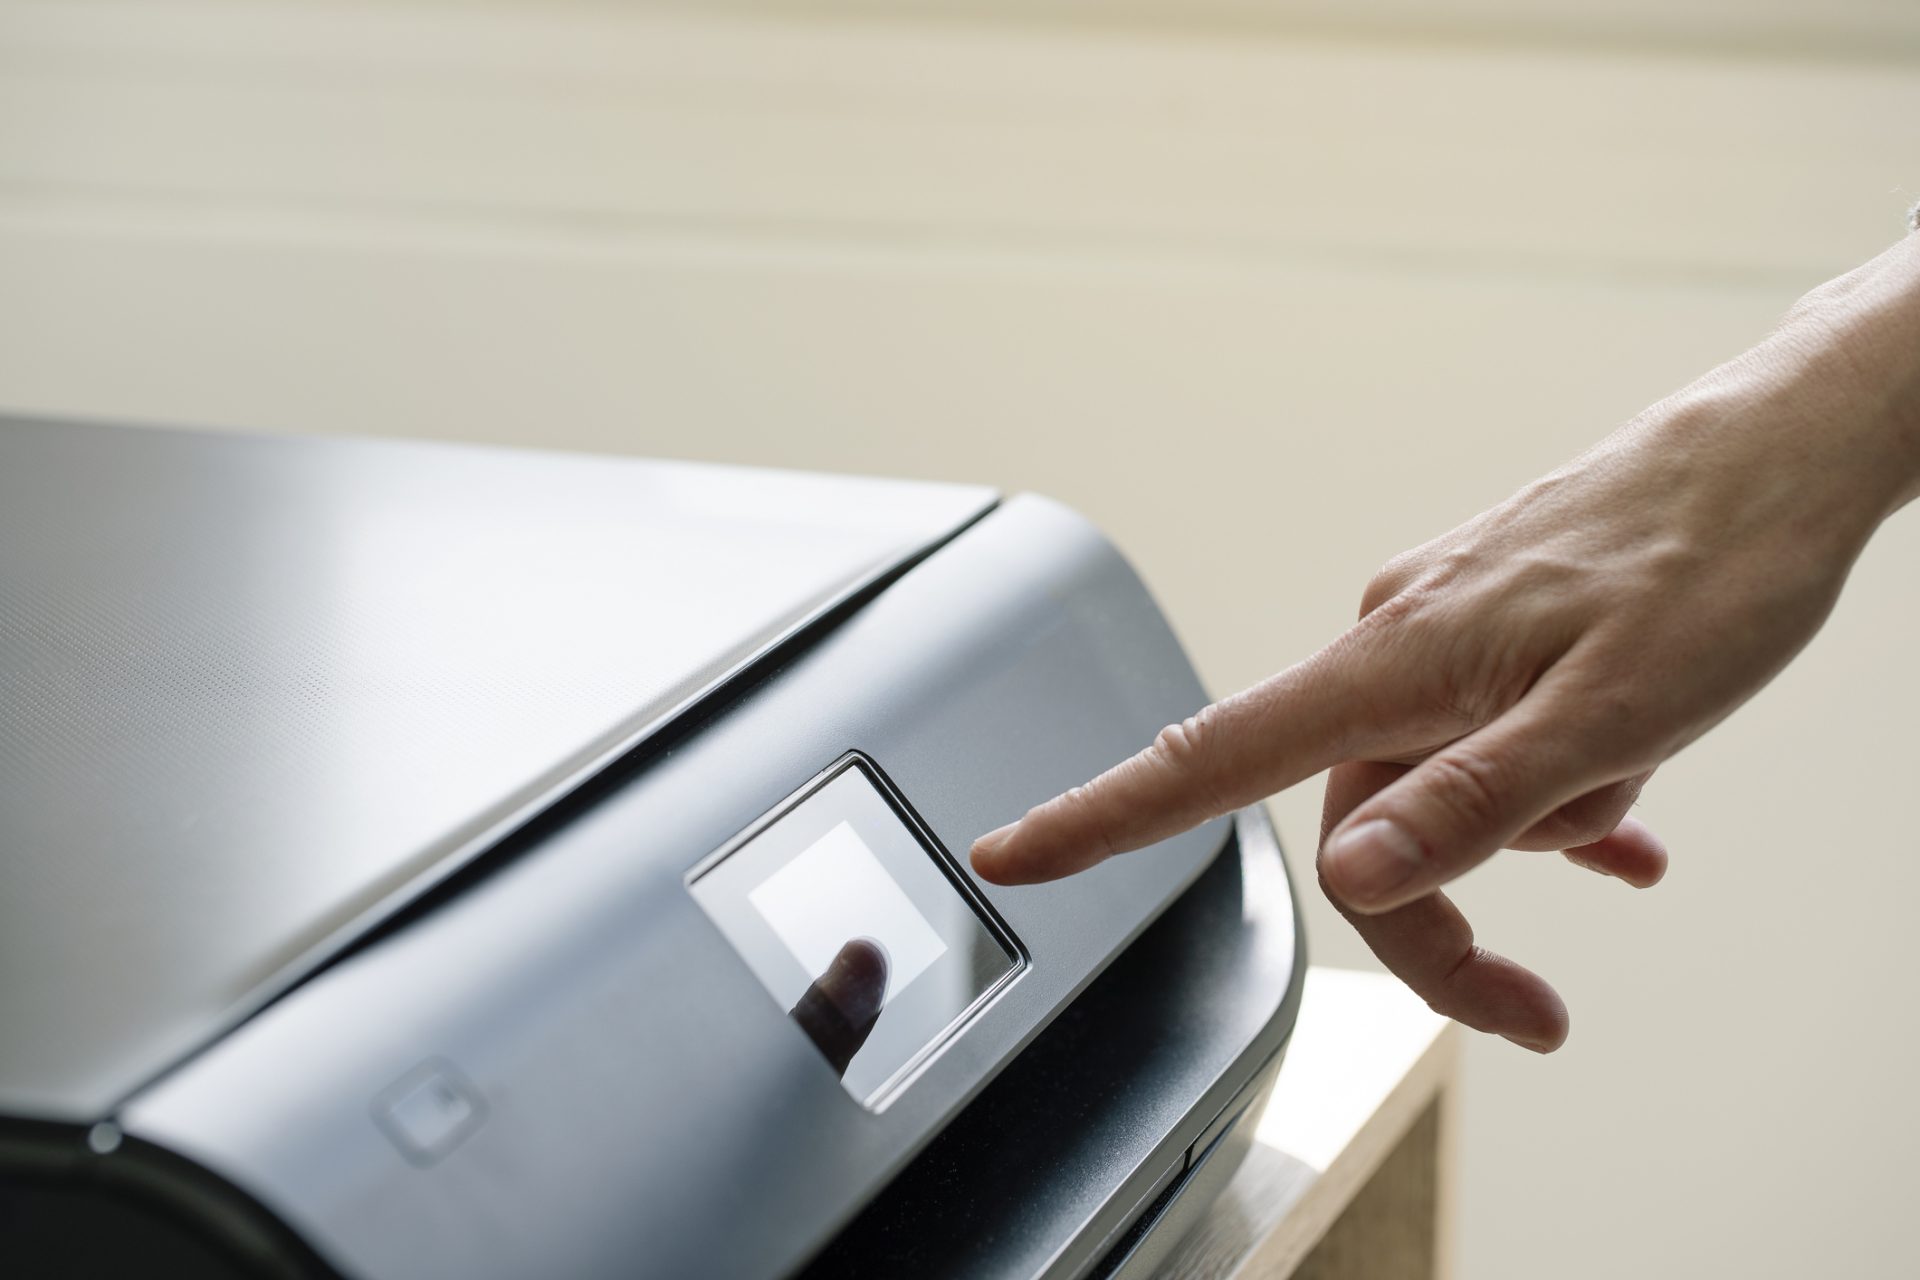 HP may face a class action lawsuit for disabling customer printers 